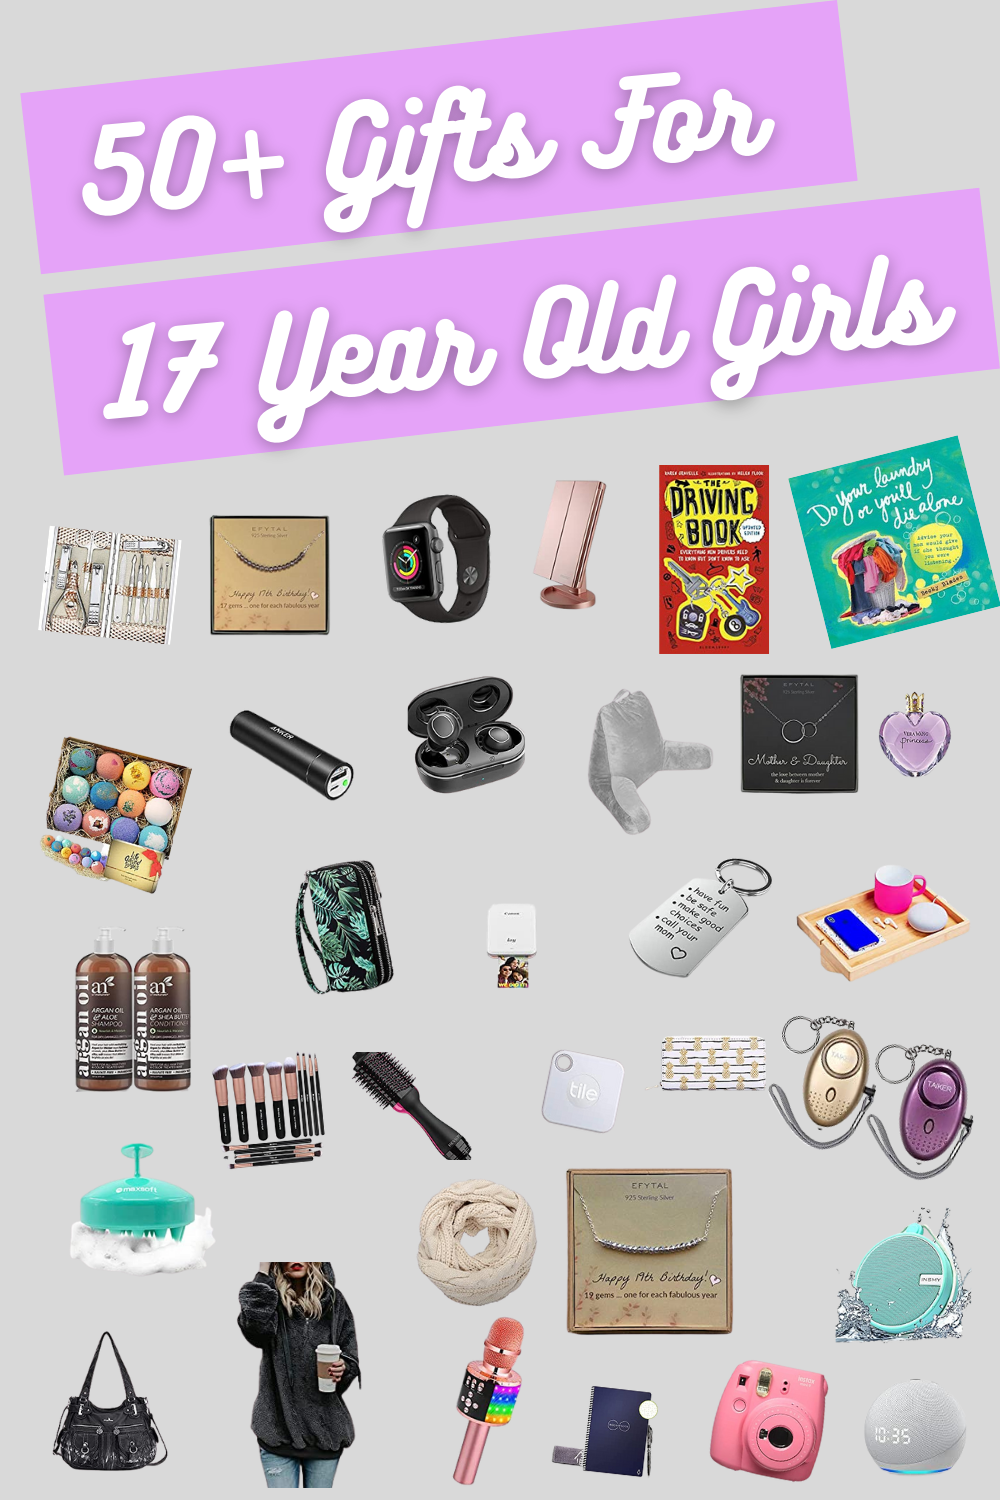 Unique Gift Ideas for 17 Year Old Girls 